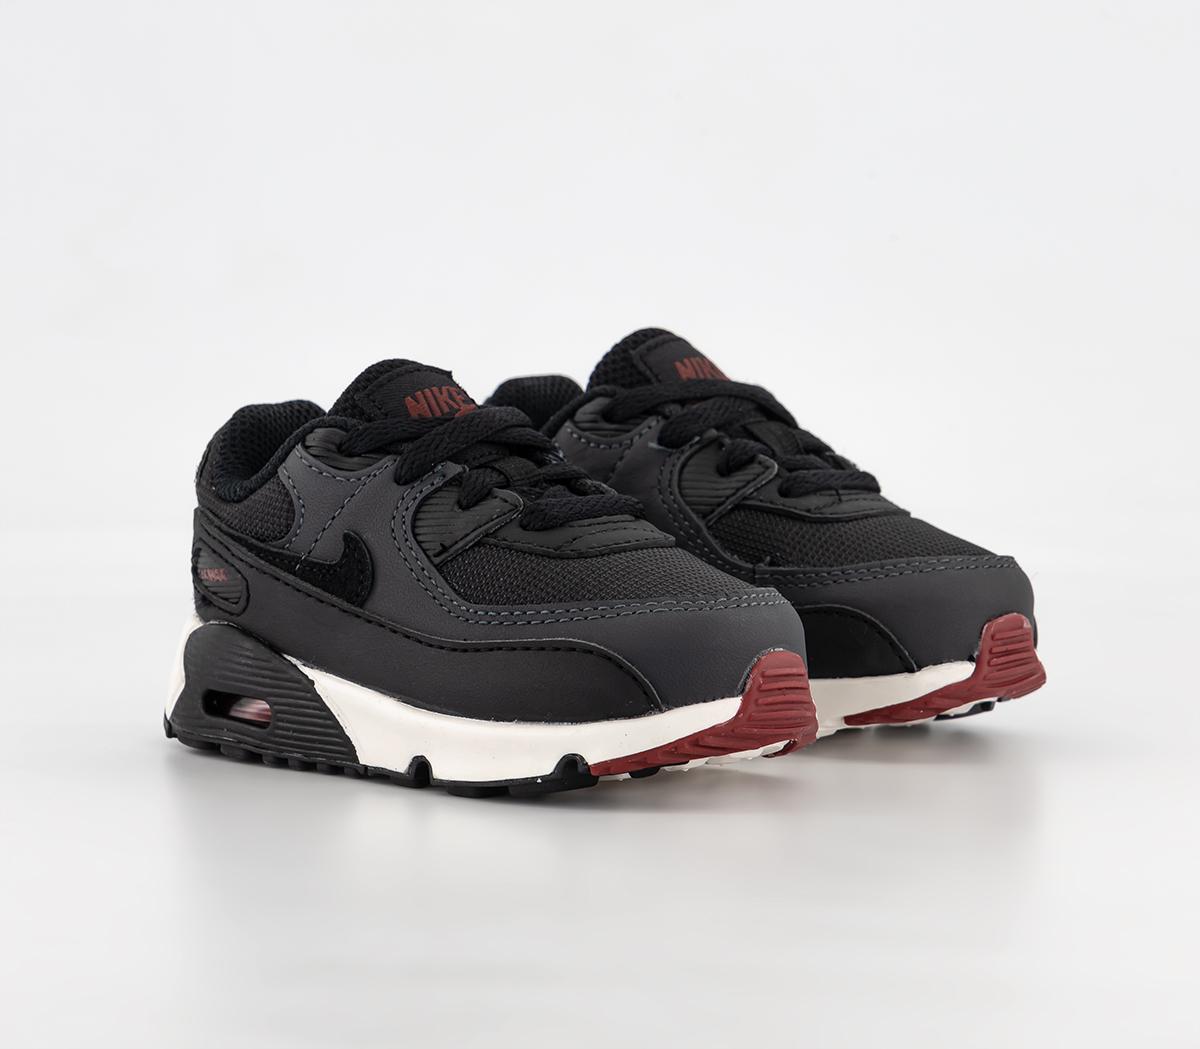 Nike Kids Air Max 90 Trainers Anthracite Black Team Red Summit White, 4.5 Infant